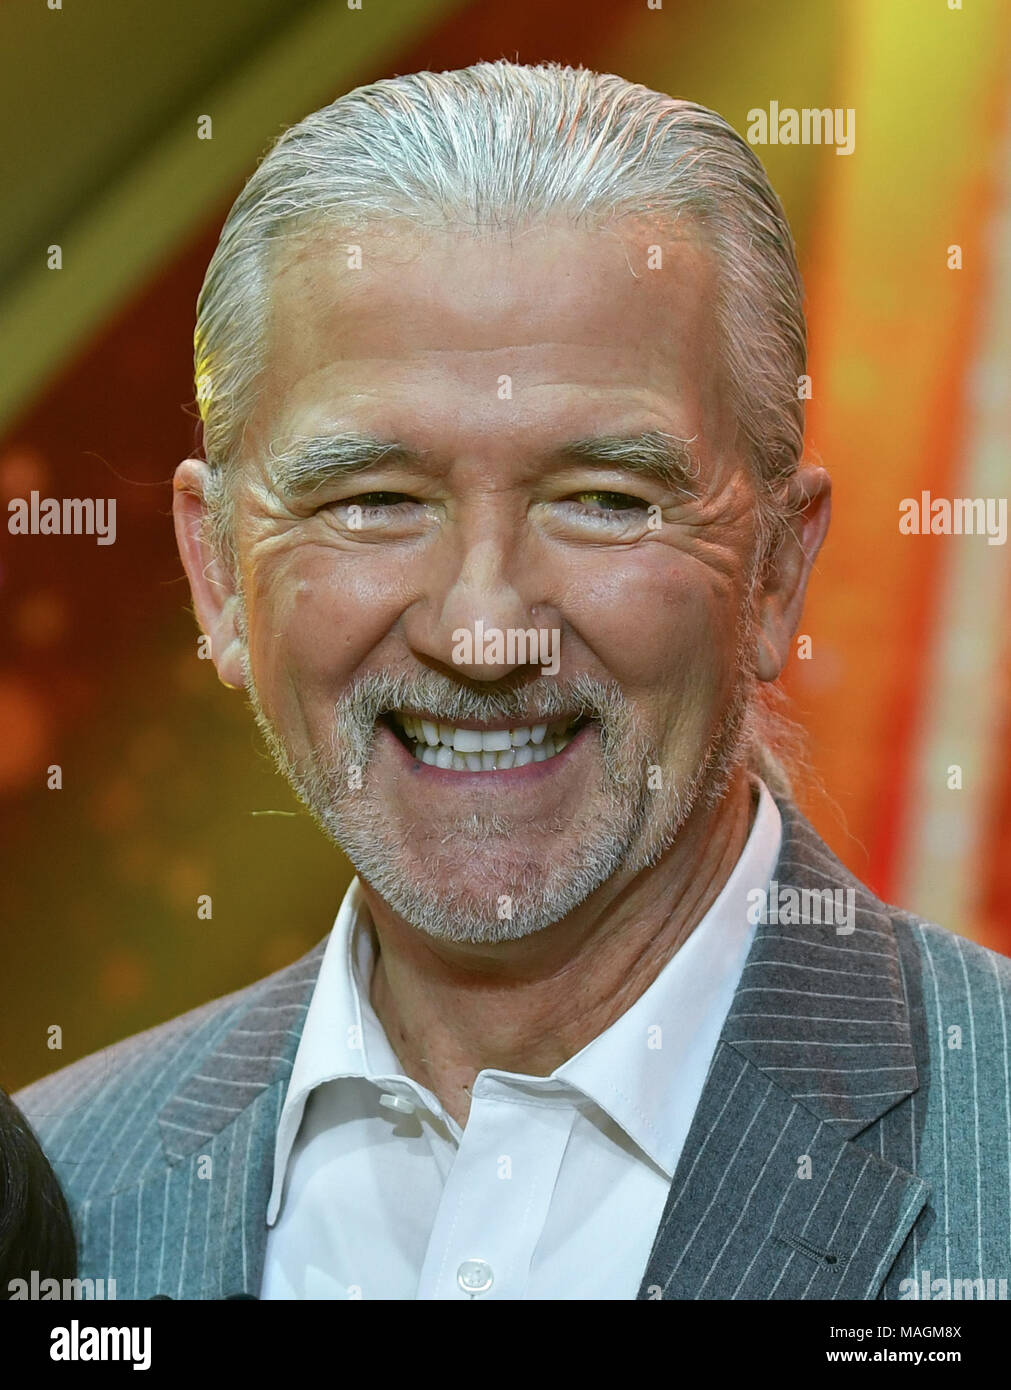 24 March 2018, Germany, Hof: The actor Patrick Duffy at the great ZDF  (German TV broadcaster) gala 'Willkommen bei Carmen Nebel' (lit. welcome to  Carmen Nebel) at the Freiheitshalle Hof. The show